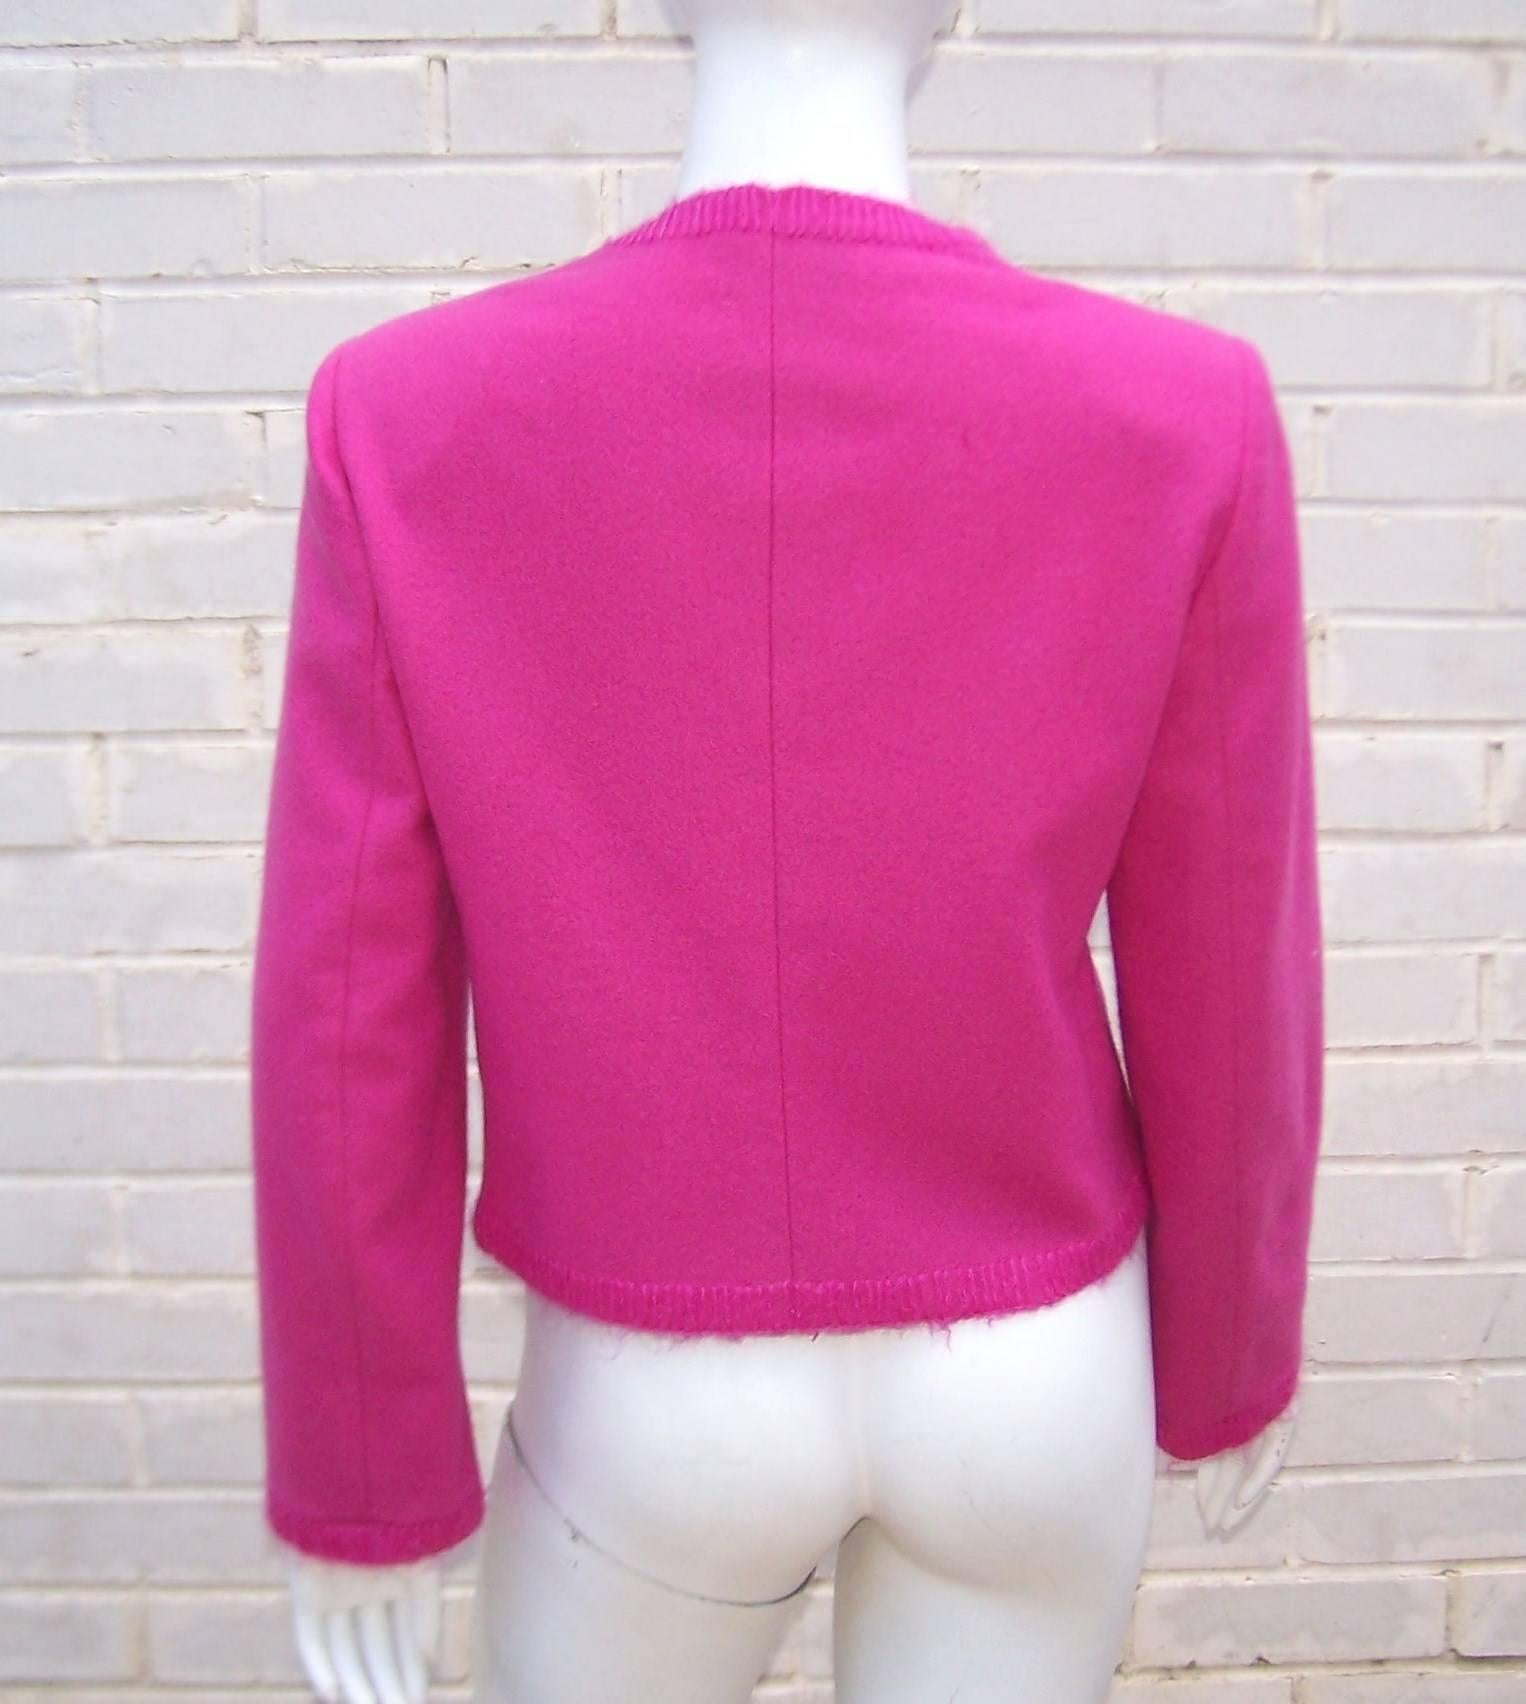 Women's Hot Pink Moschino Wool Felt Jacket With Deconstructed Details